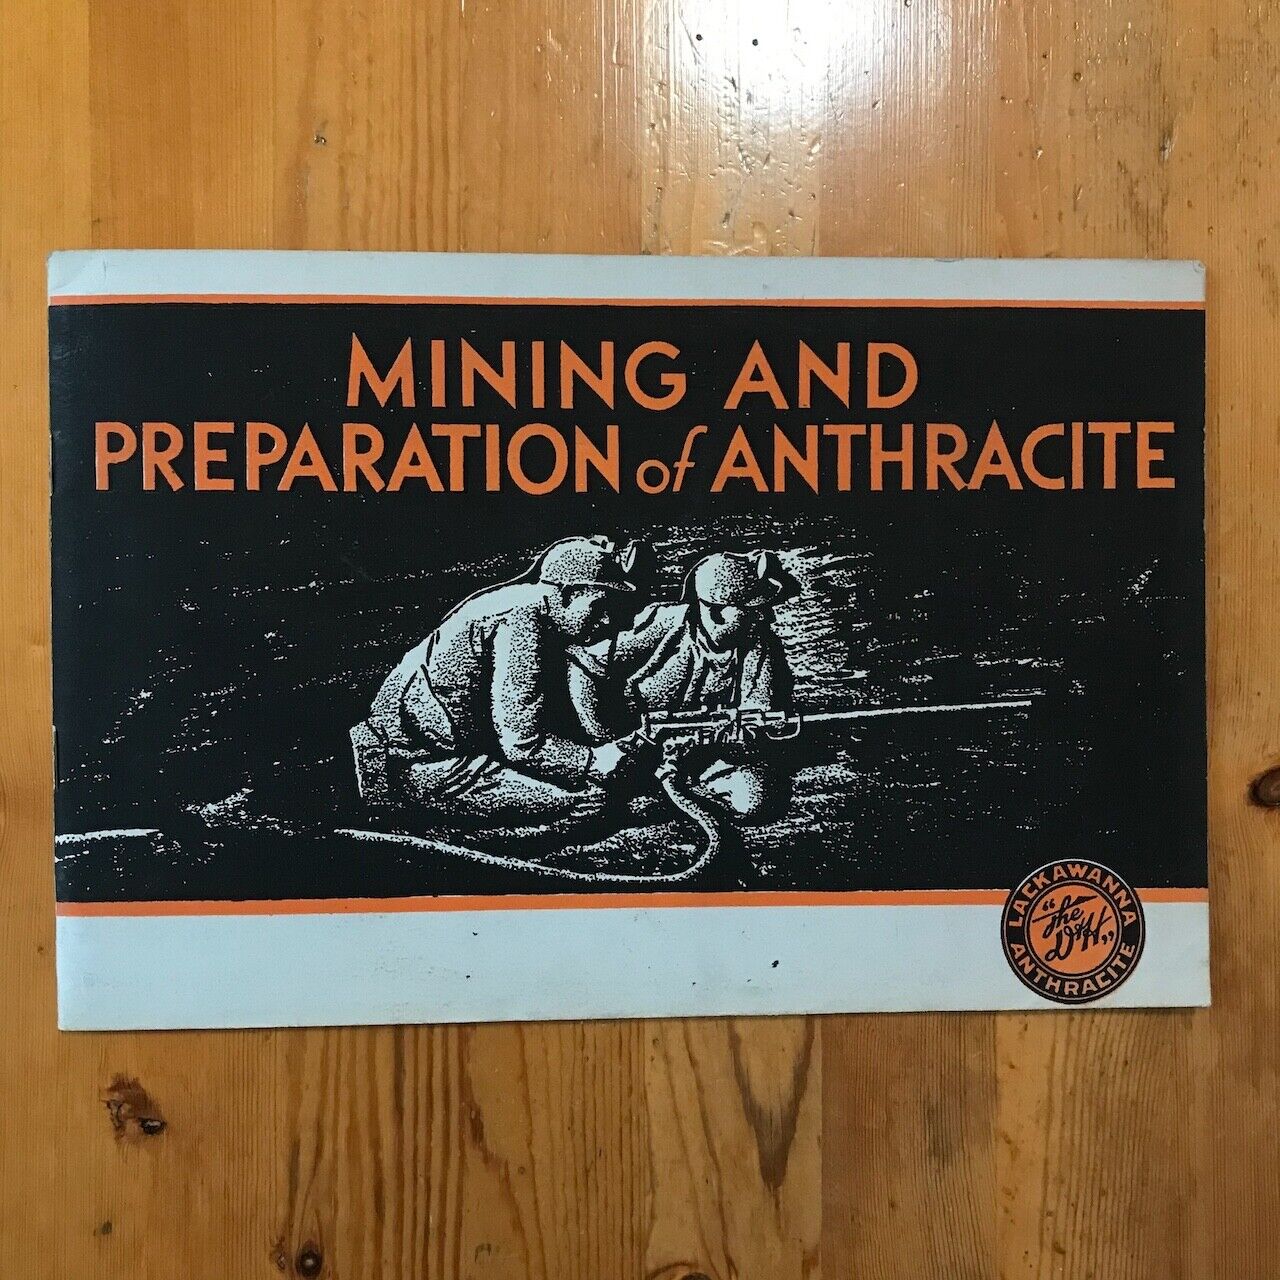 MINING AND PREPARATION OF D&H ANTHRACITE- Hudson Coal Co, Scranton PA 1944